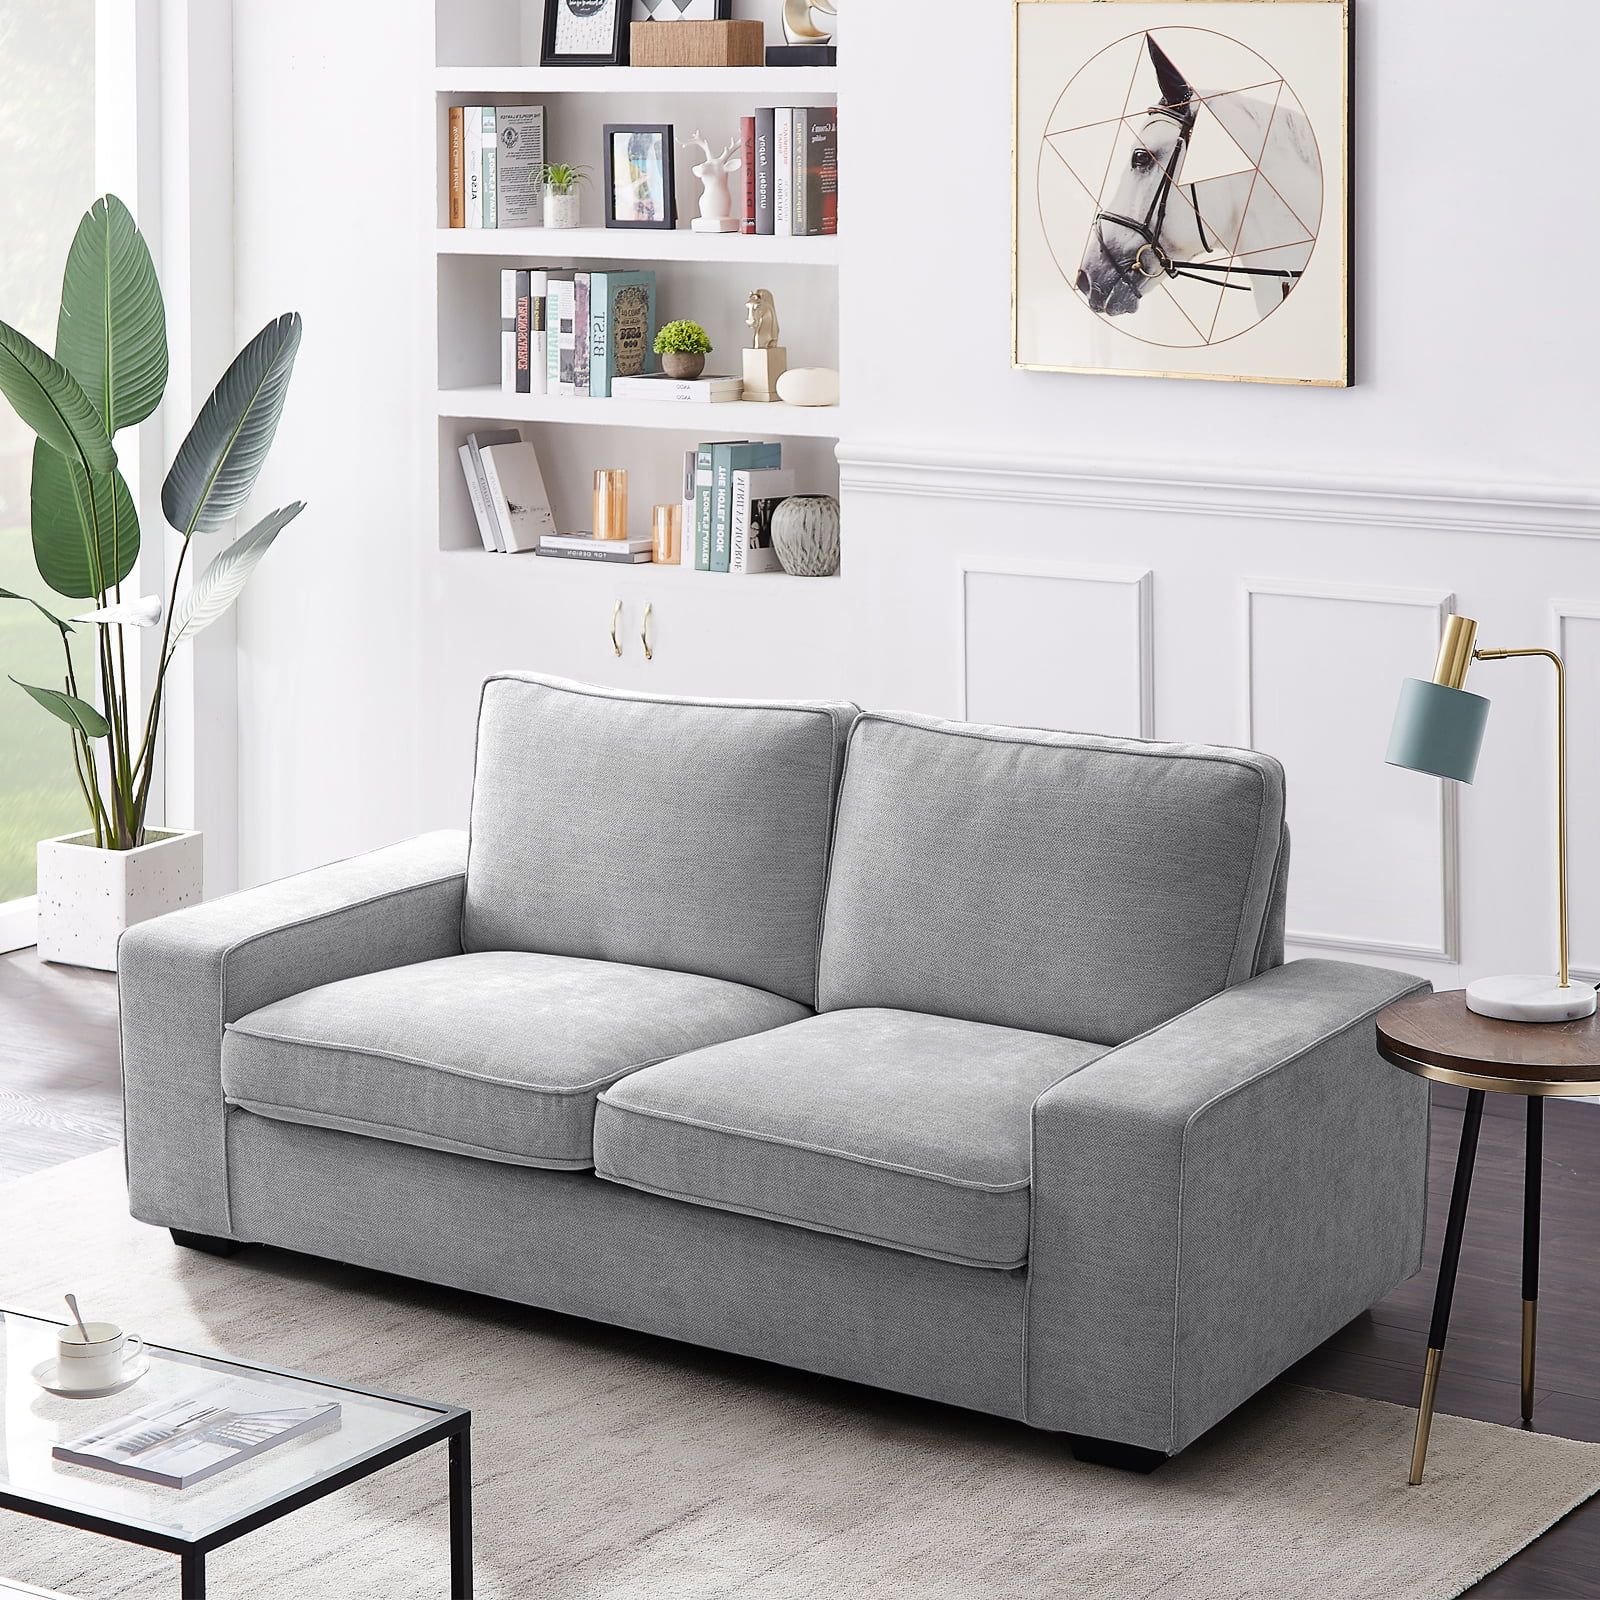 71.25" Modern Loveseat Sofa With Solid Wood Frame, Living Room Chair,  Chenille Couches For Small Spaces, Removable Back Cushion And Easy,  Tool Free Assembly (light Grey) – Walmart In Modern Loveseat Sofas (Gallery 2 of 20)